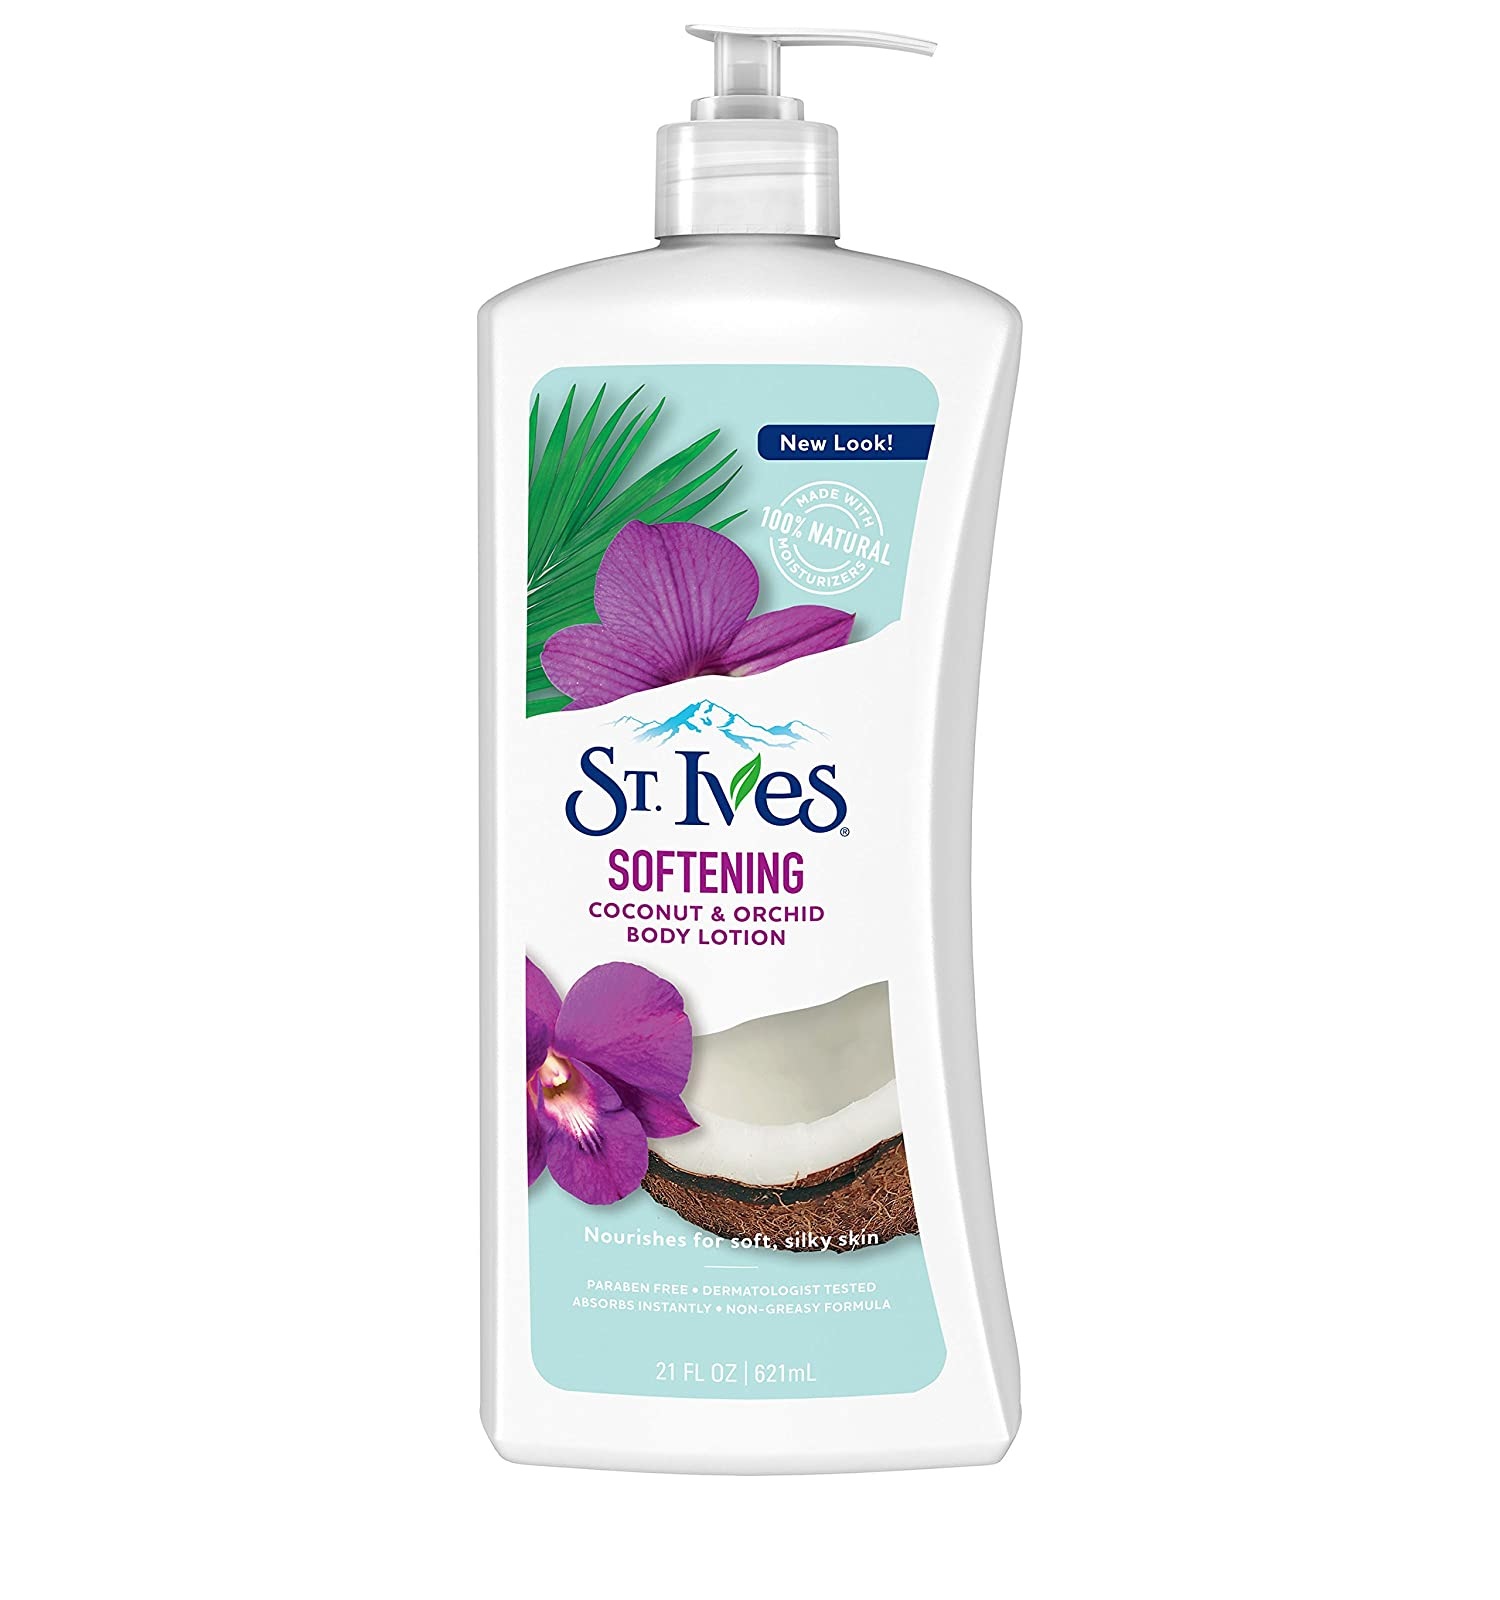 St Ives Softening Coconut and Orchid Body Lotion, 21 Oz - image 1 of 2